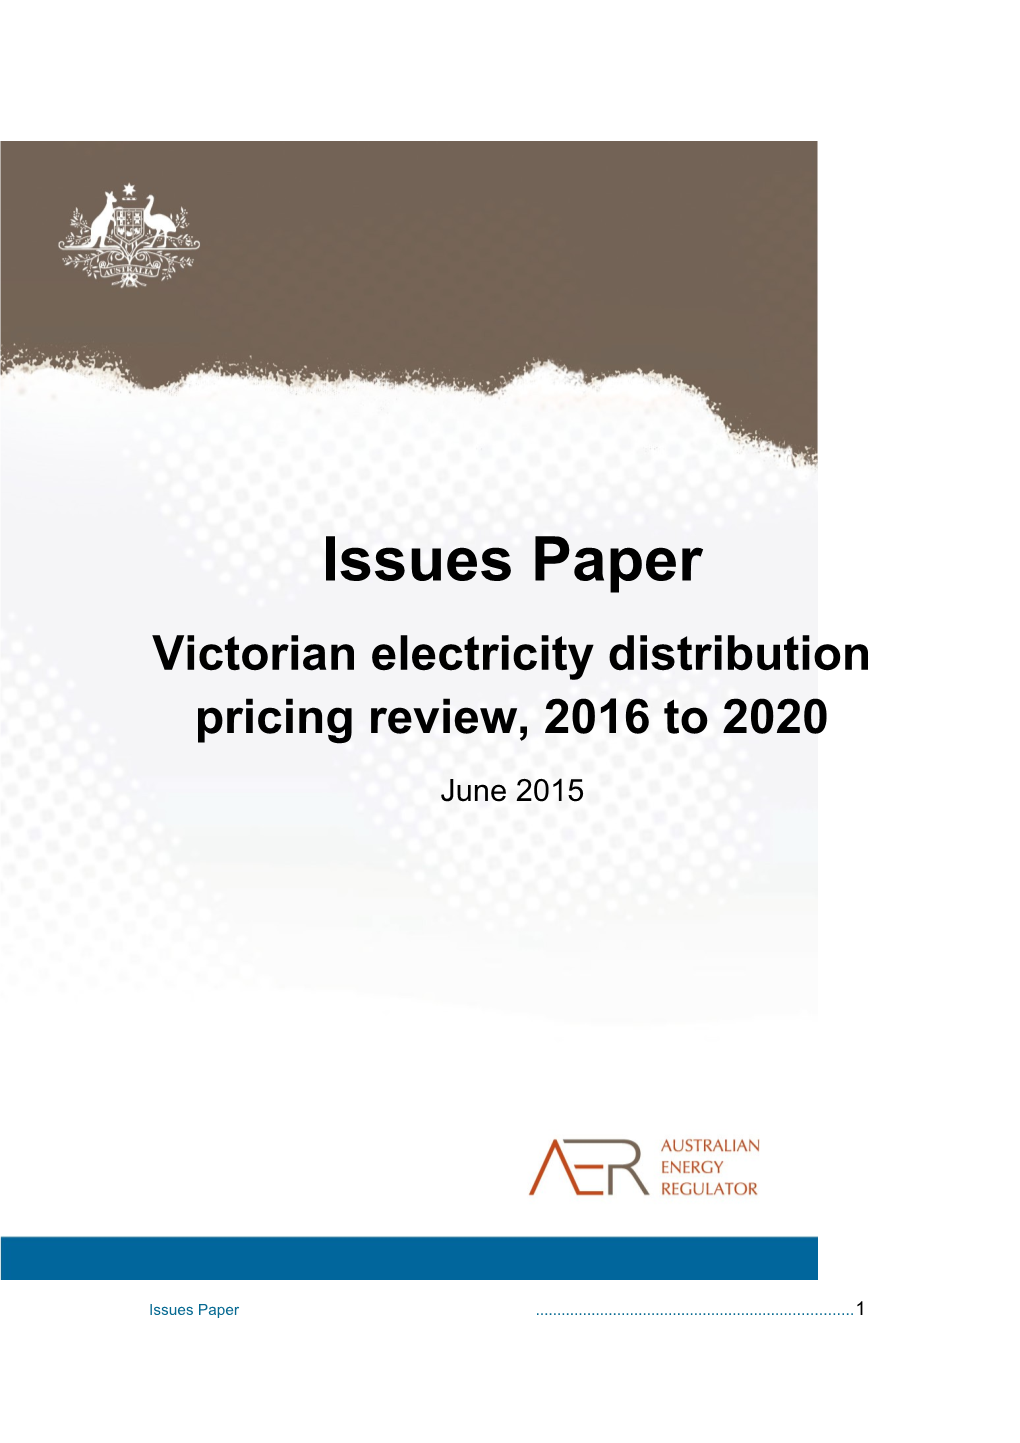 Victorian Electricity Distribution Pricing Review, 2016 to 2020